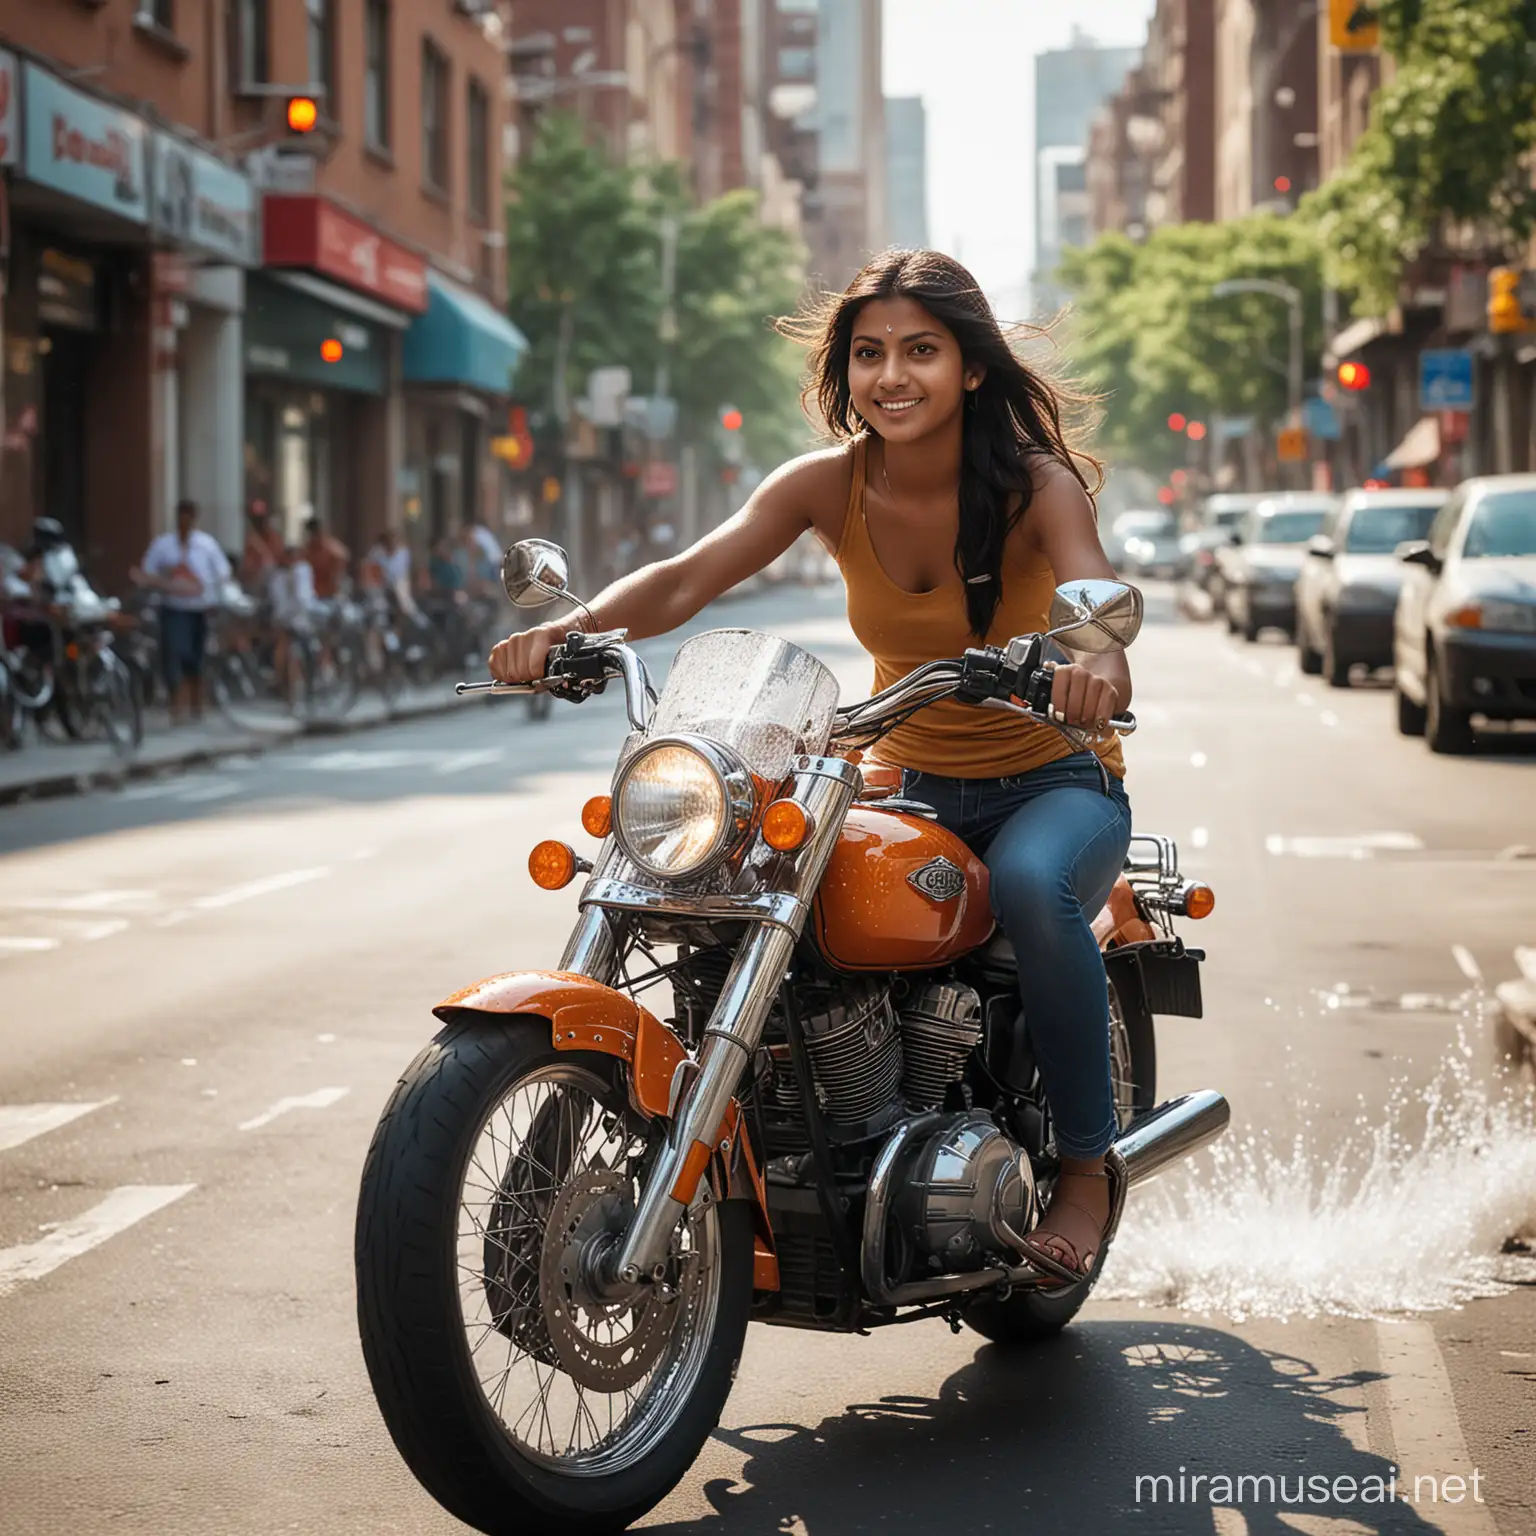 Generate an image featuring a young Indian girl confidently riding a motorcycle through a bustling cityscape on a hot summer day. The motorcycle should be prominently displayed and entirely covered in glistening ice, emphasizing the contrast between the frozen bike and the sweltering environment. The girl's expression should exude joy and liberation as she enjoys the refreshing ride. Ensure the bike fills the frame, with details of the ice texture clearly visible. Incorporate warm colors to convey the summer atmosphere, with cool tones accentuating the icy exterior of the bike. Capture the energy of the city streets with bustling activity and vibrant surroundings. Overall, the image should evoke a sense of cool relief amidst the summer heat.





